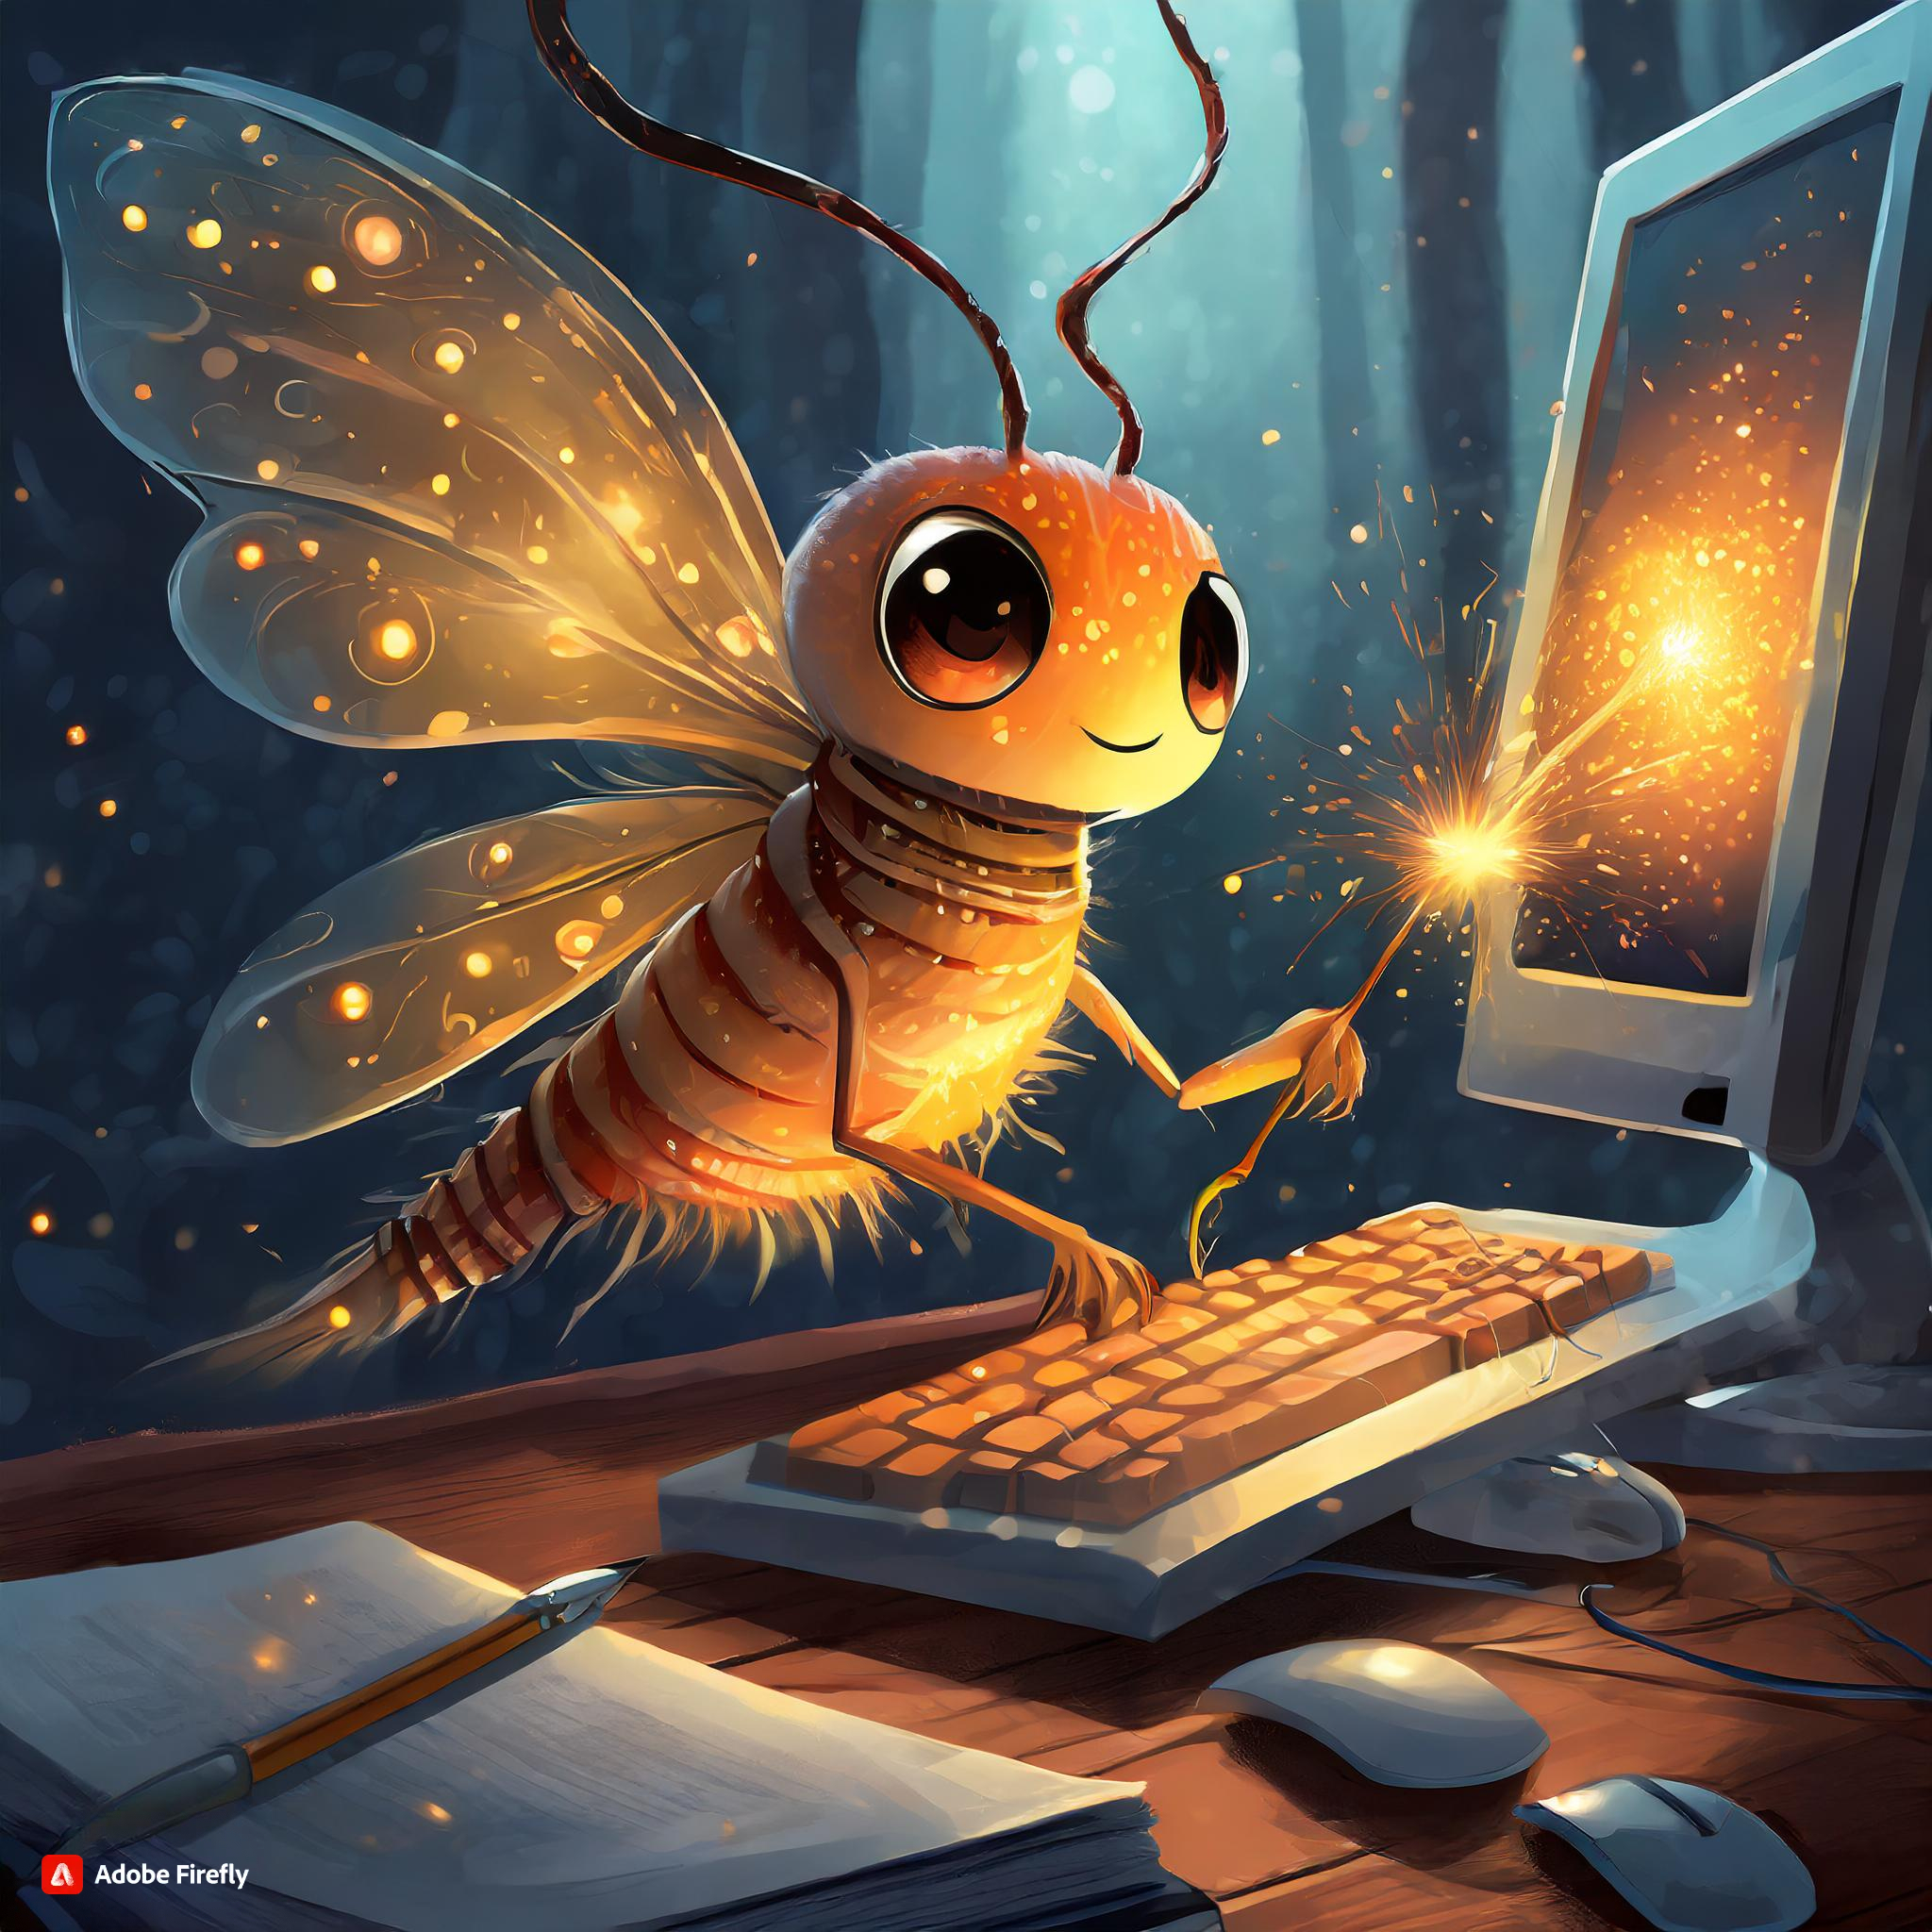 Firefly and a Computer by Adobe Firefly